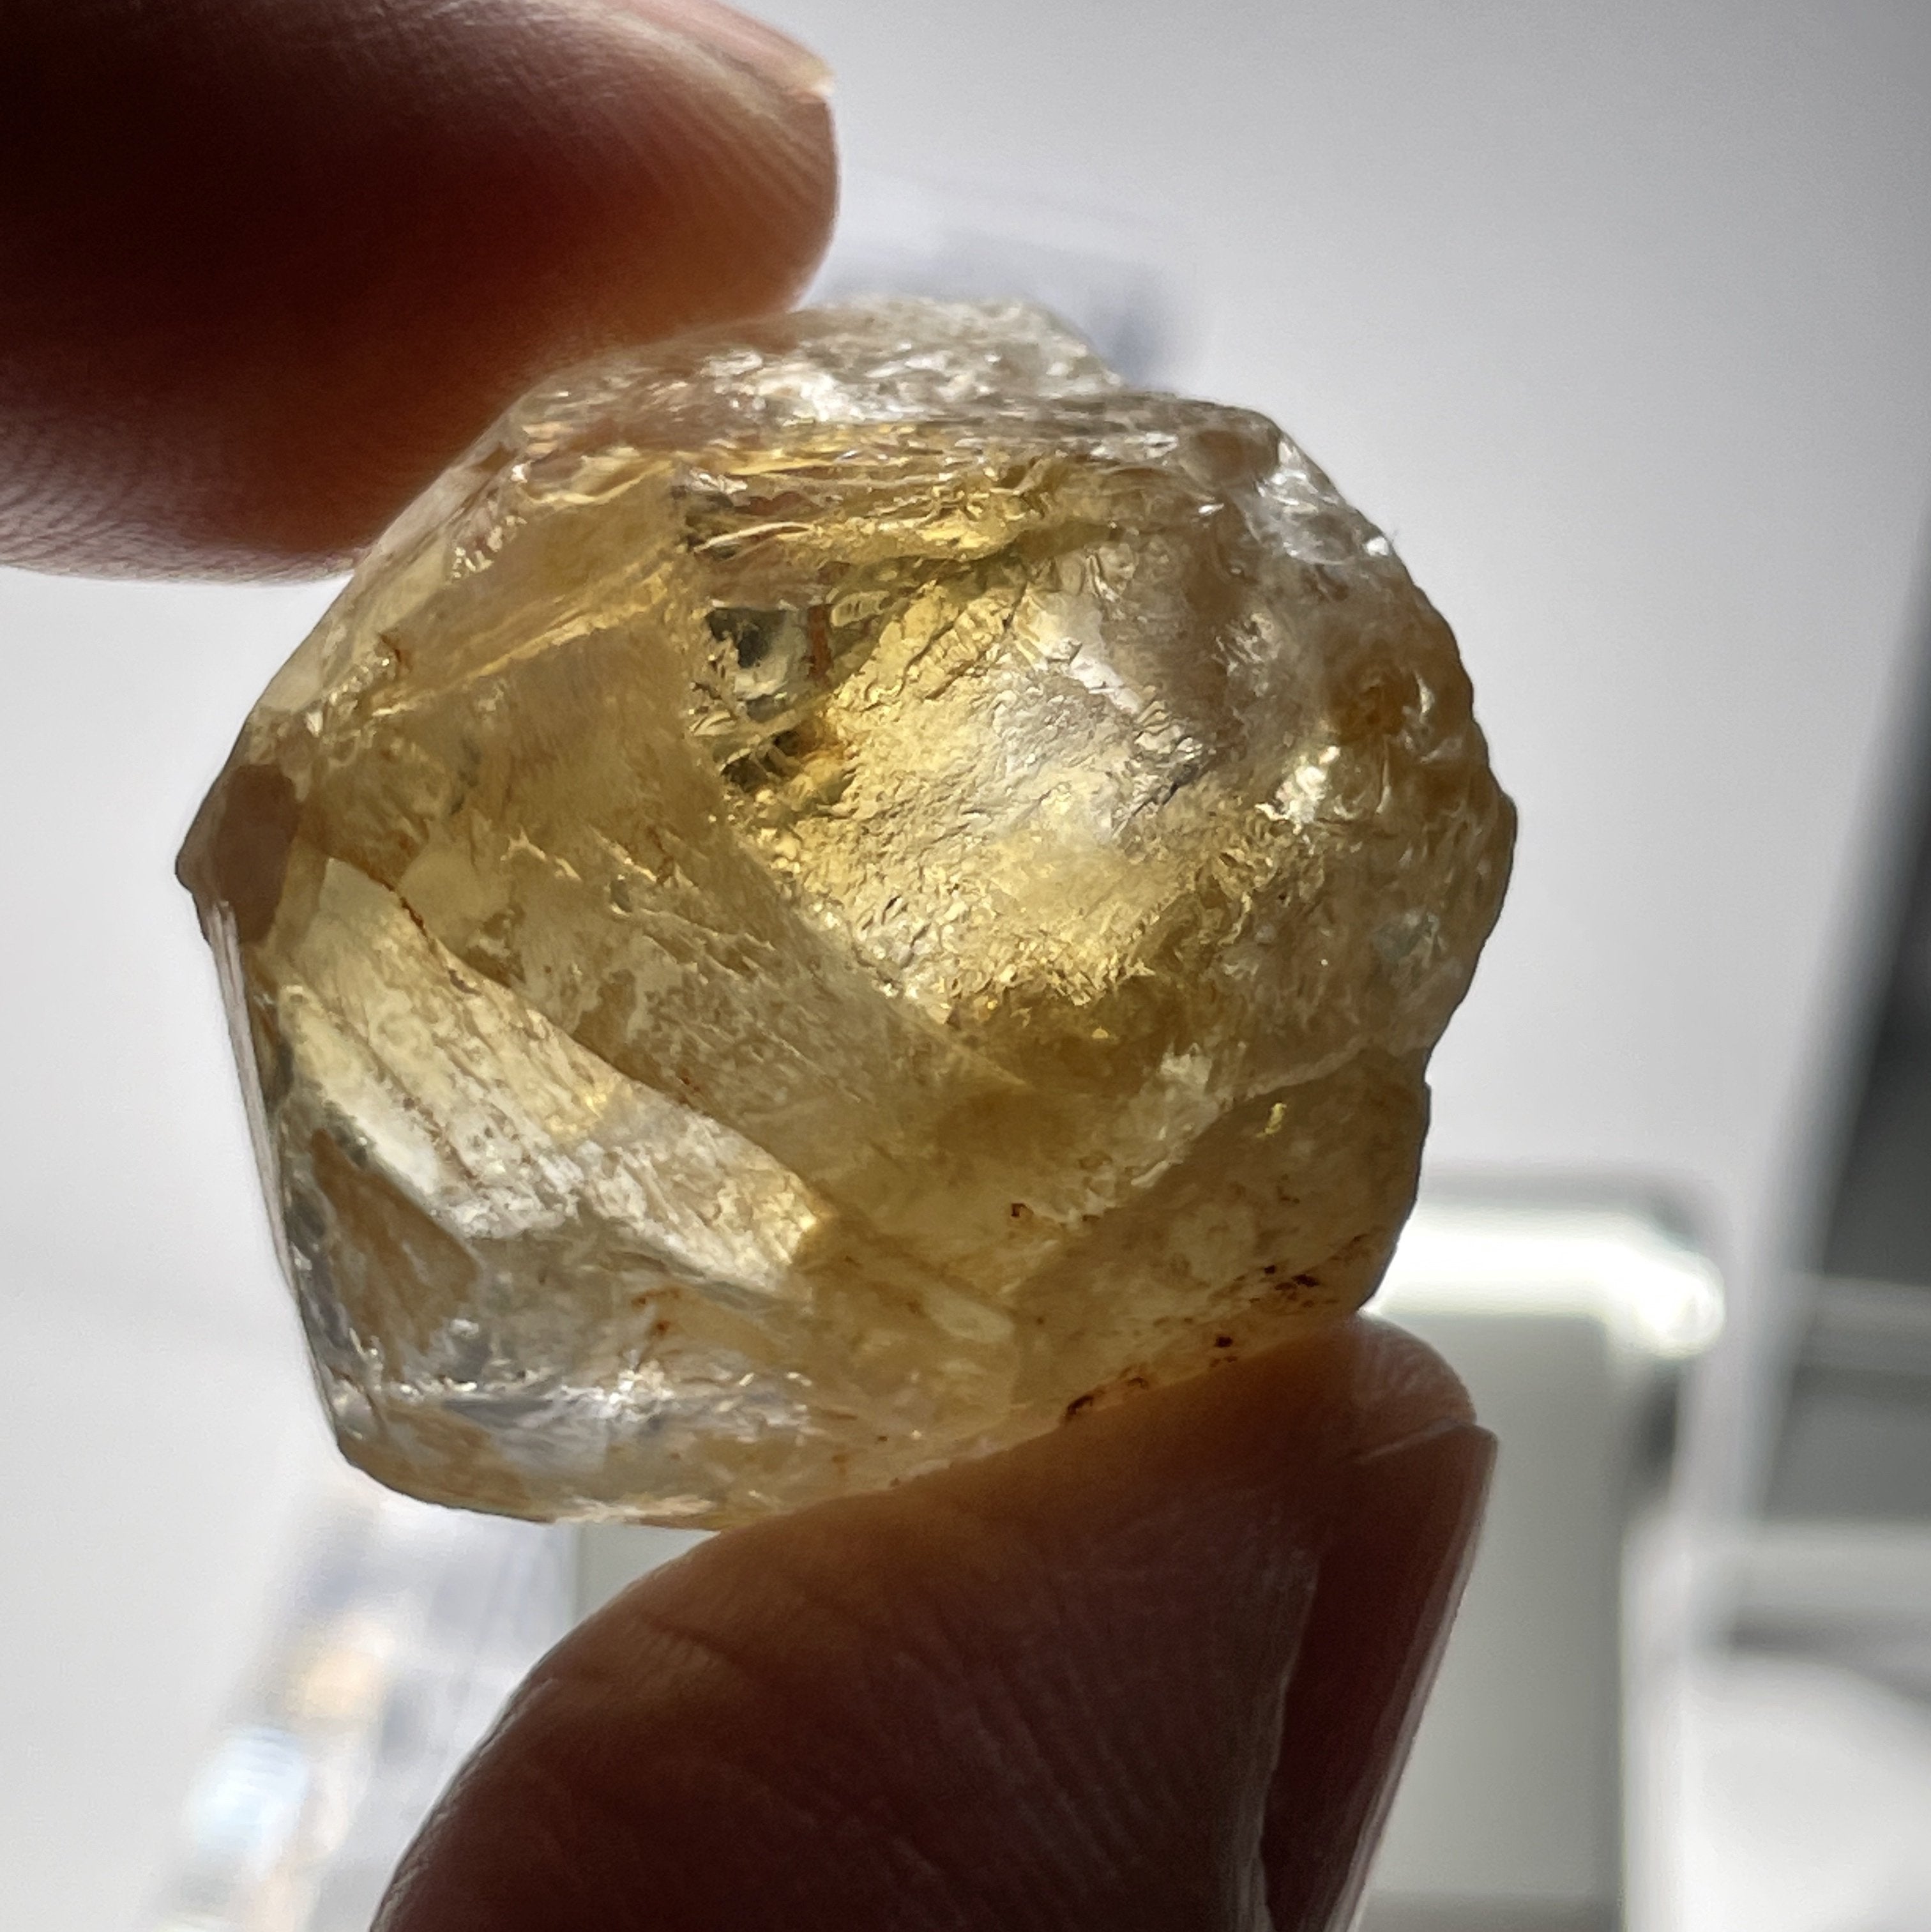 13.38Gm Citrine Zambia. Untreated Unheated. Rare As Not Heated From Amethyst Natural Colour.